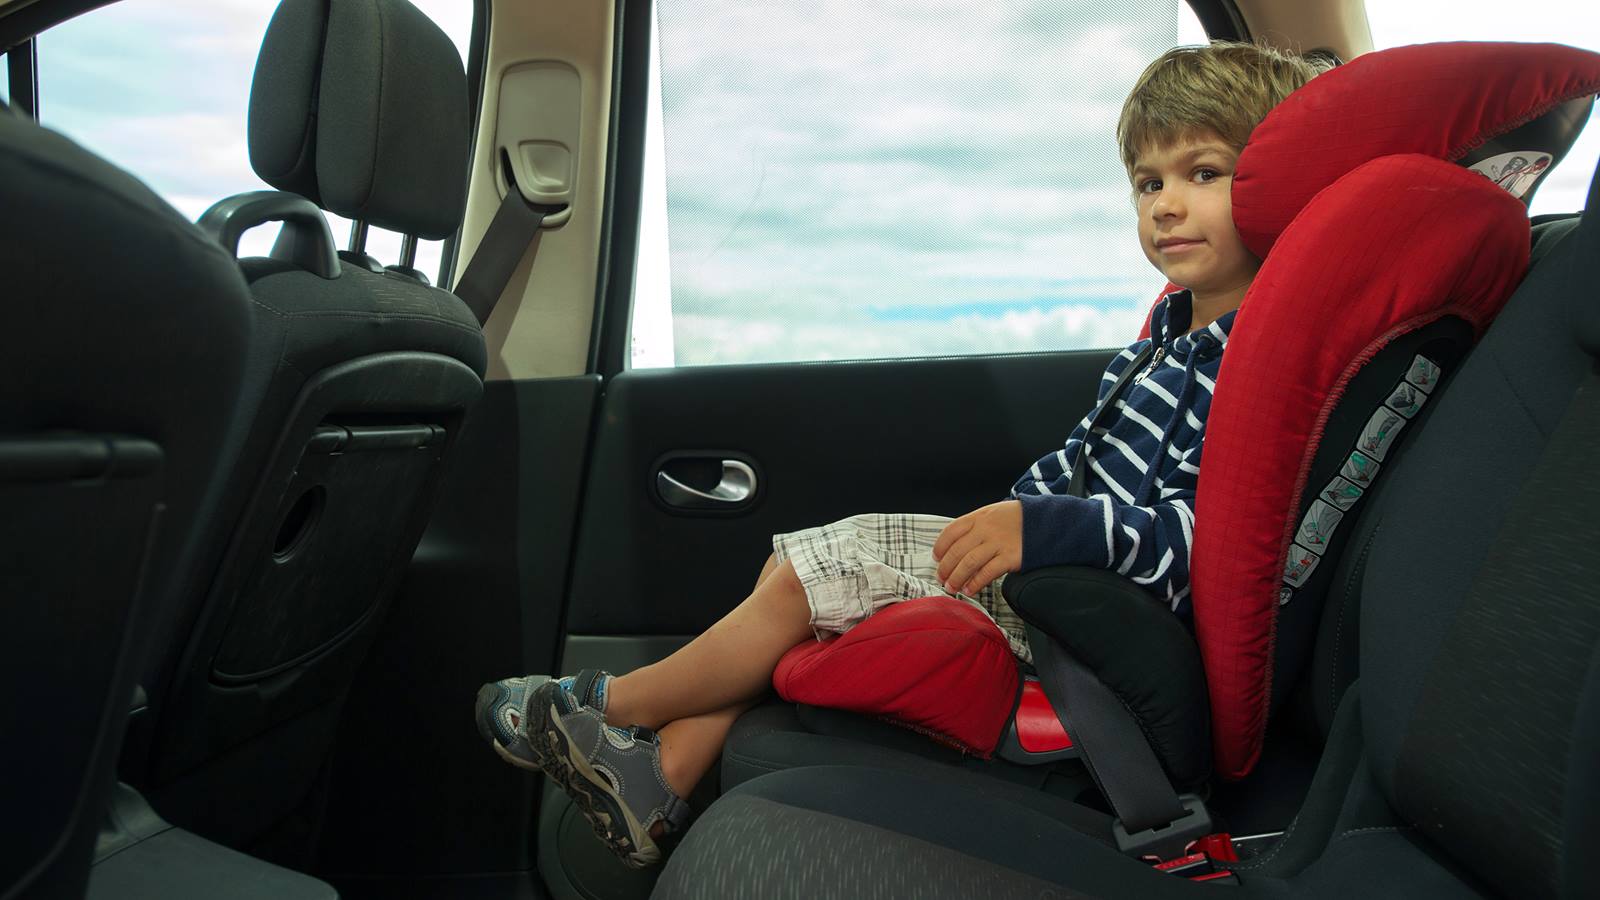 Child Ready To Move Into A Booster Seat, What Age Can A Child Have Just Booster Seat